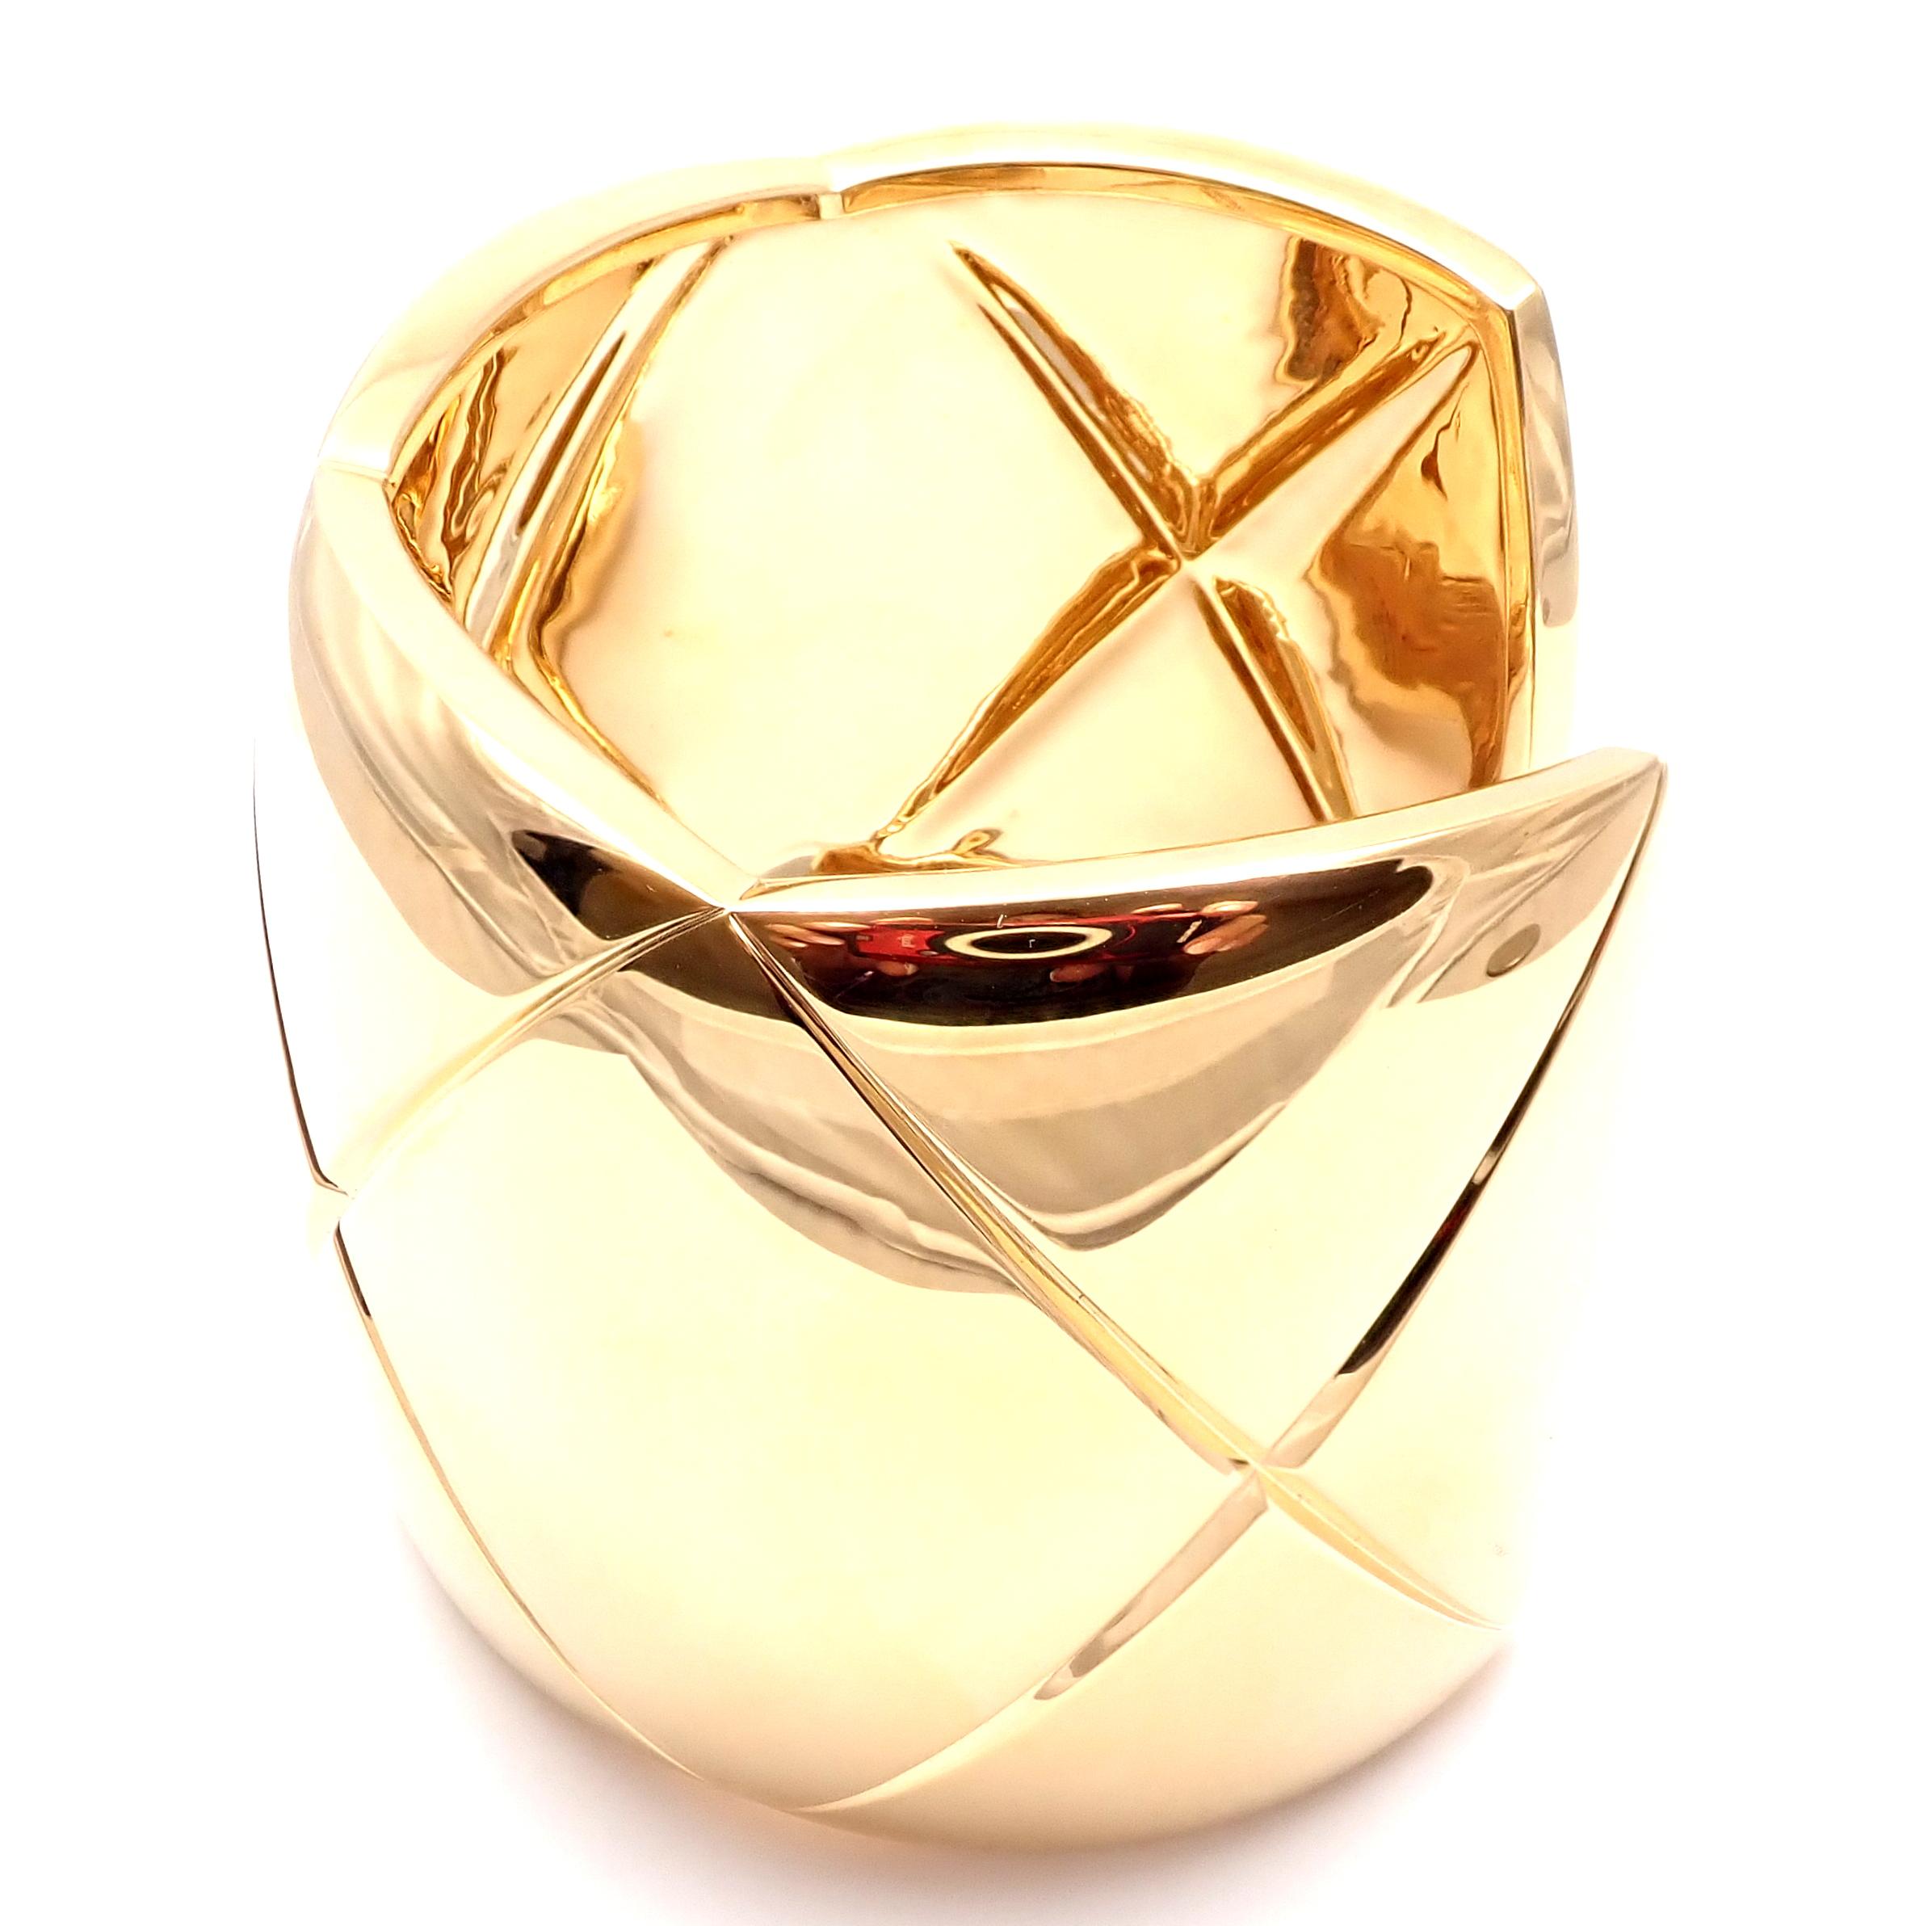 Women's or Men's Chanel Coco Crush Yellow Gold Cuff Bangle Bracelet For Sale